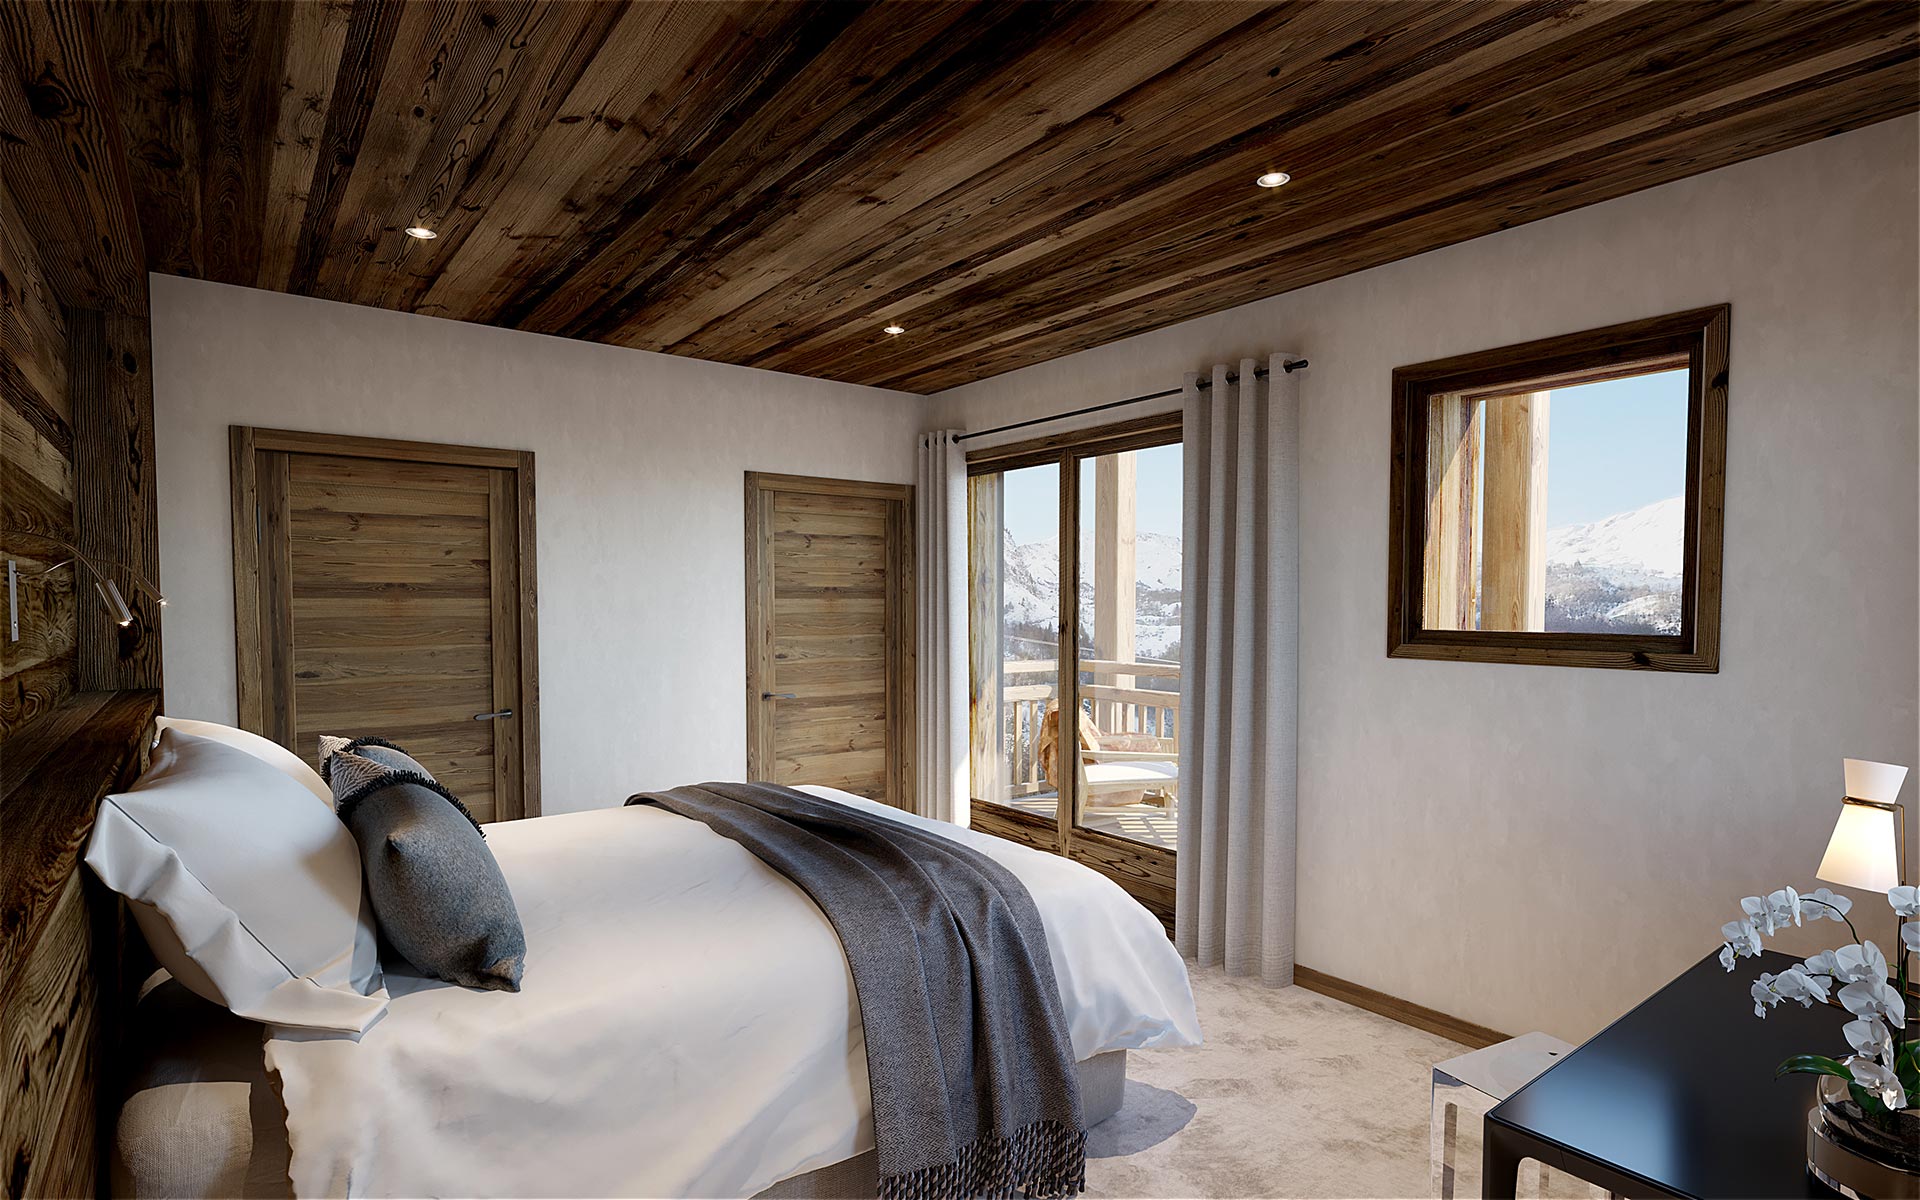 3D interior Visualization of a bedroom in a luxury chalet